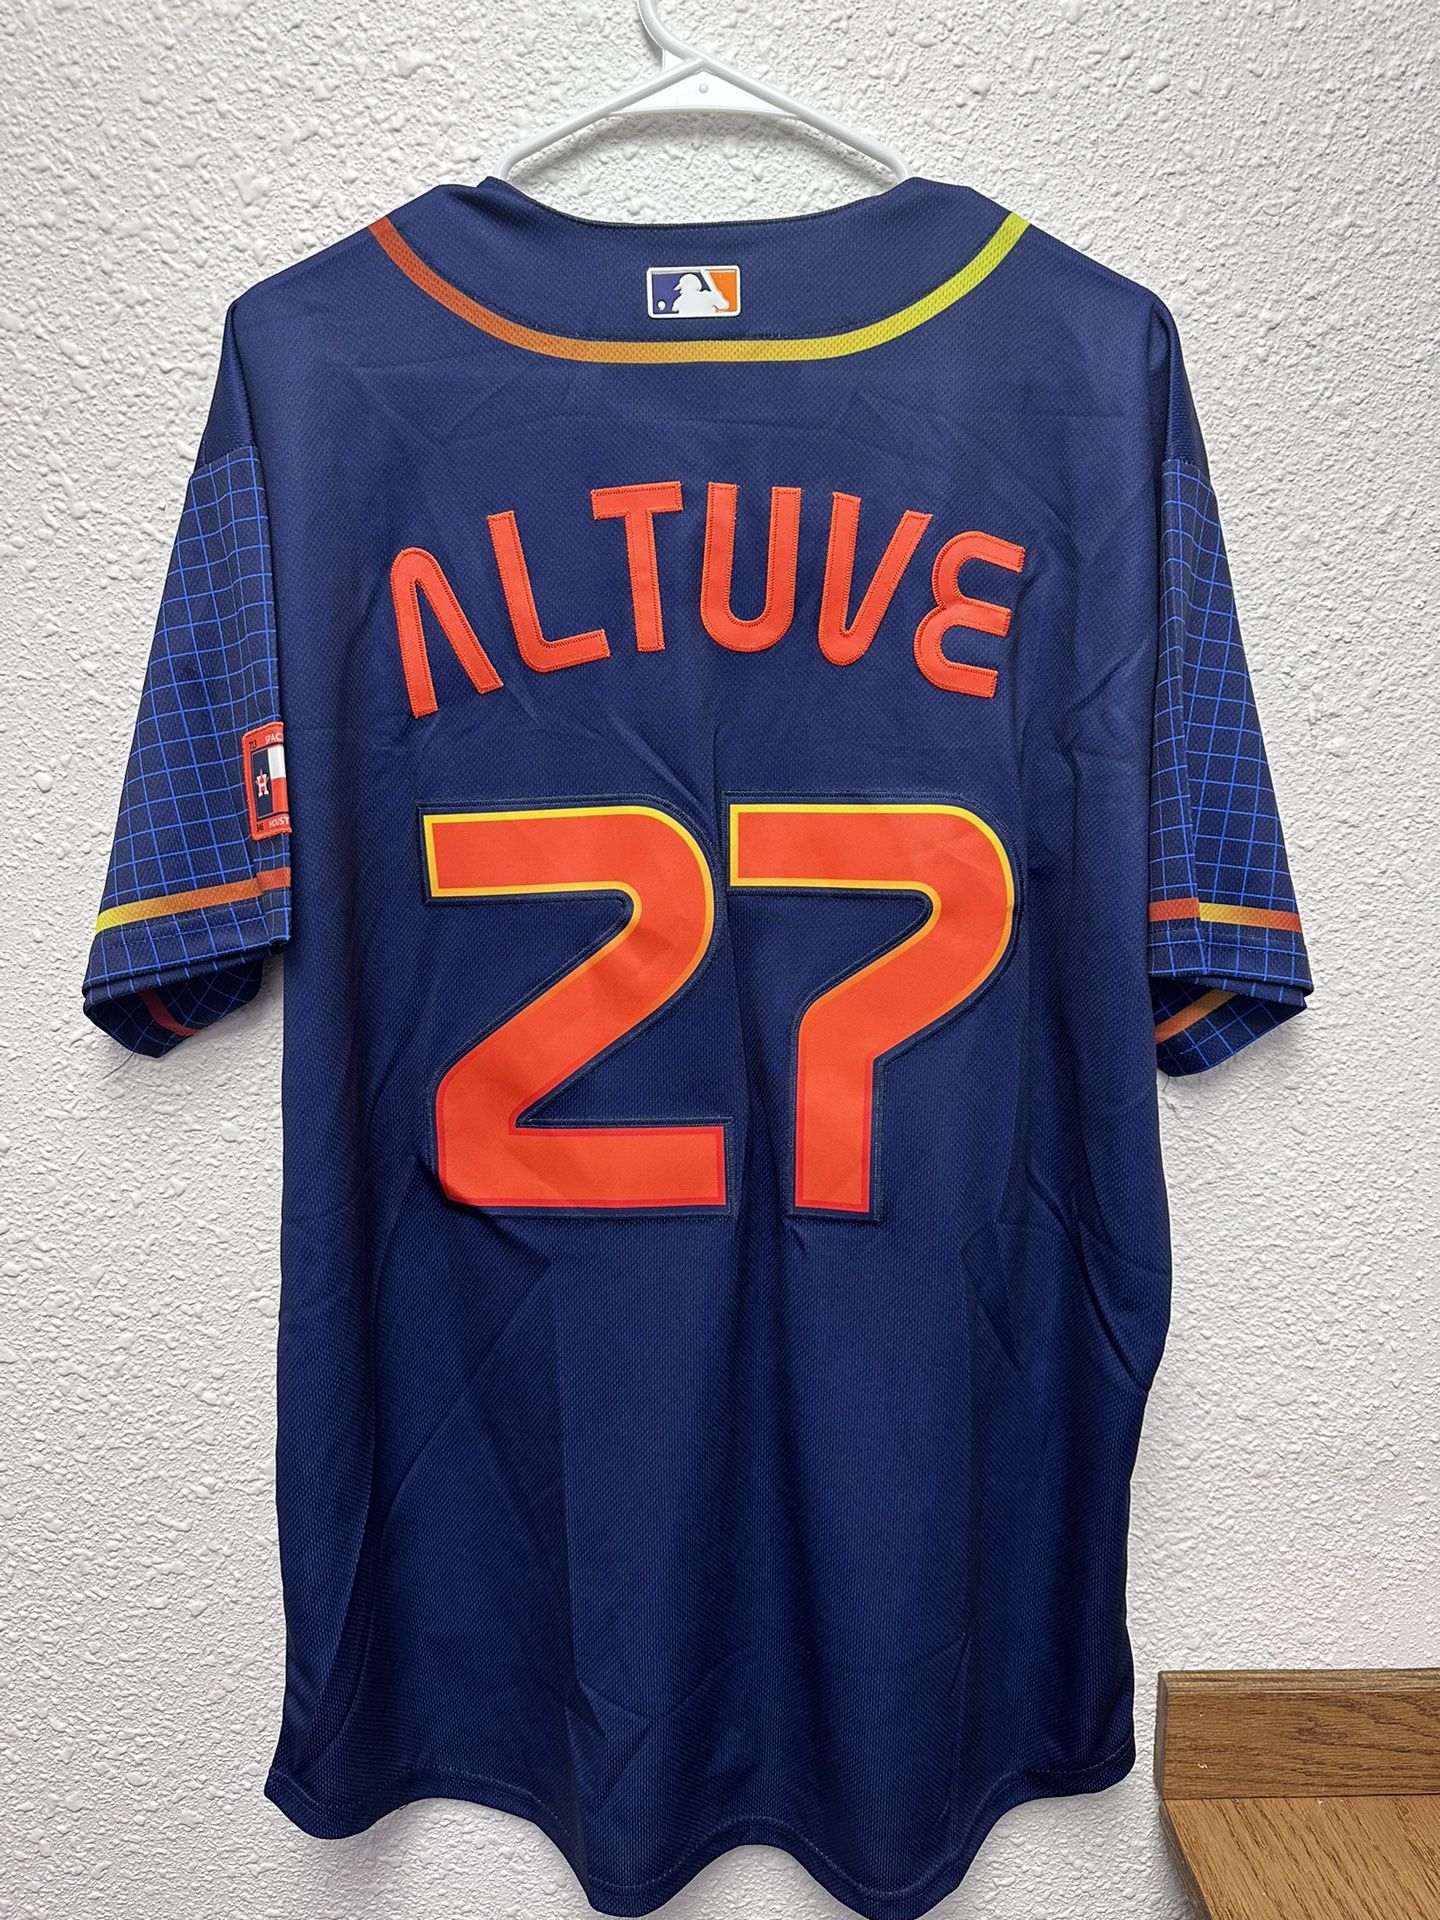 Jose Altuve stitched jersey Houston Astros Space City Brand New with tags!  for Sale in San Antonio, TX - OfferUp